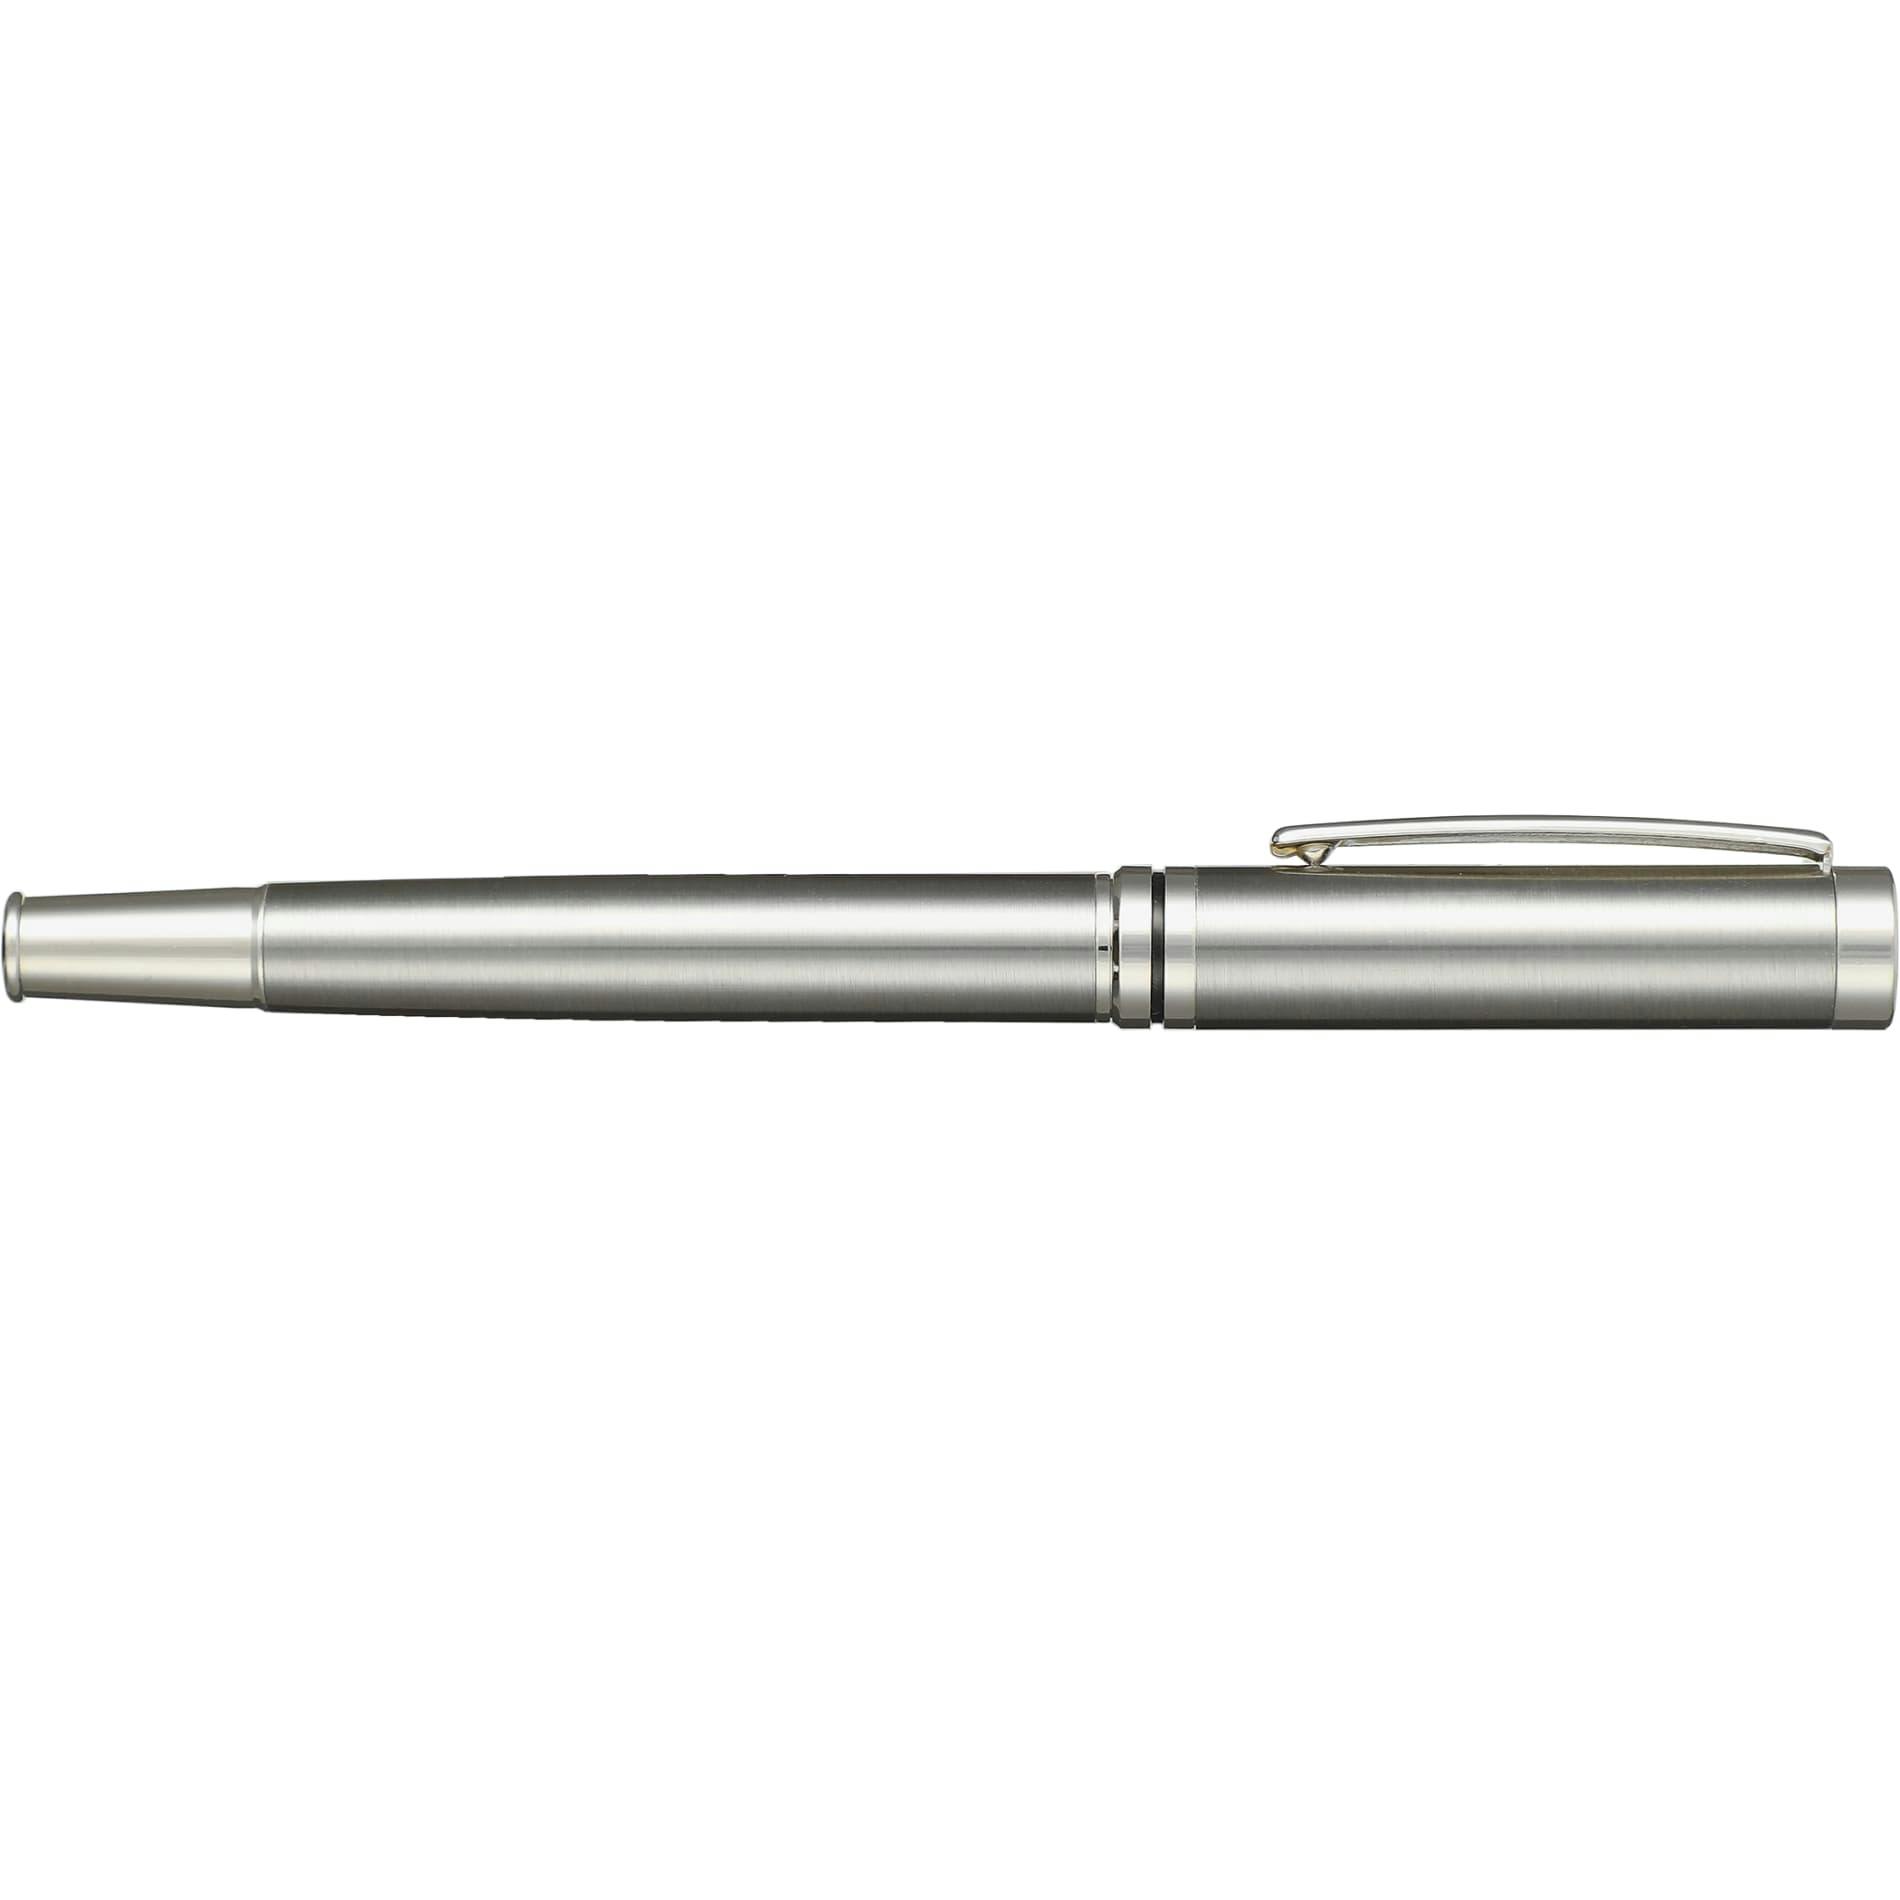 Recycled Stainless Steel Rollerball Pen - additional Image 1